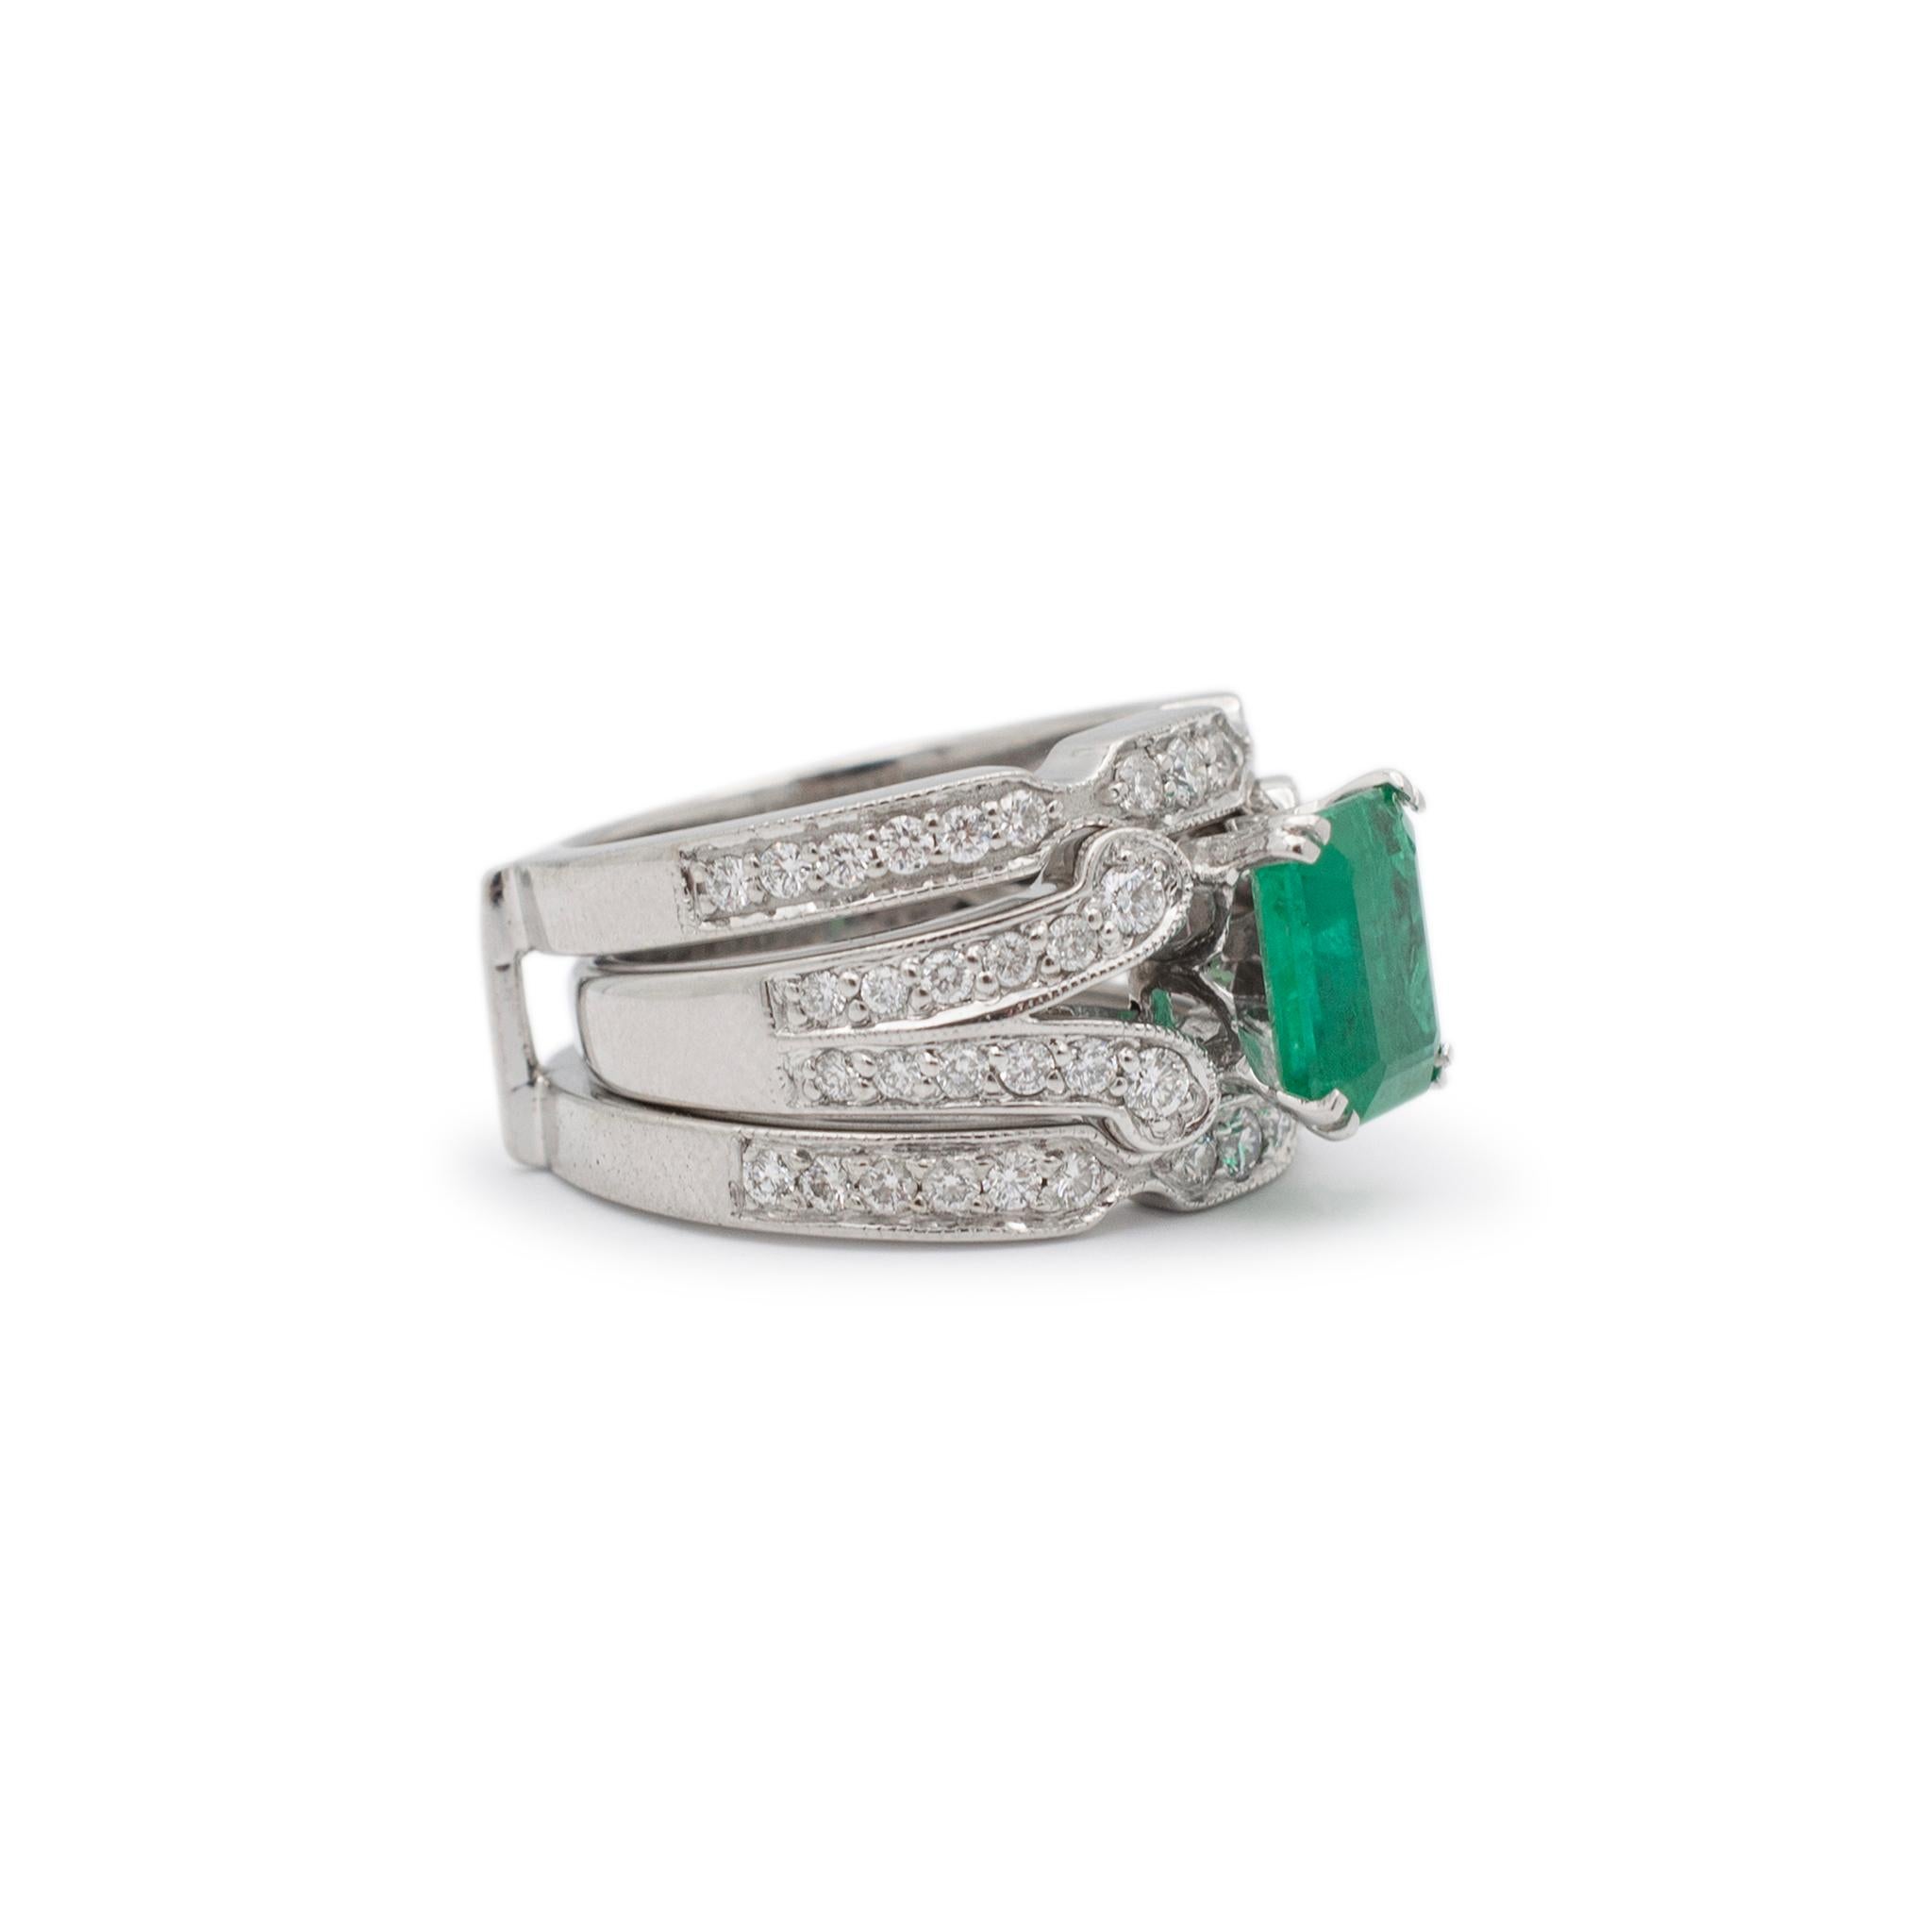 Ladies 18K White Gold Emerald Accented Diamond Cocktail Ring With Jacket Ring In Excellent Condition For Sale In Houston, TX